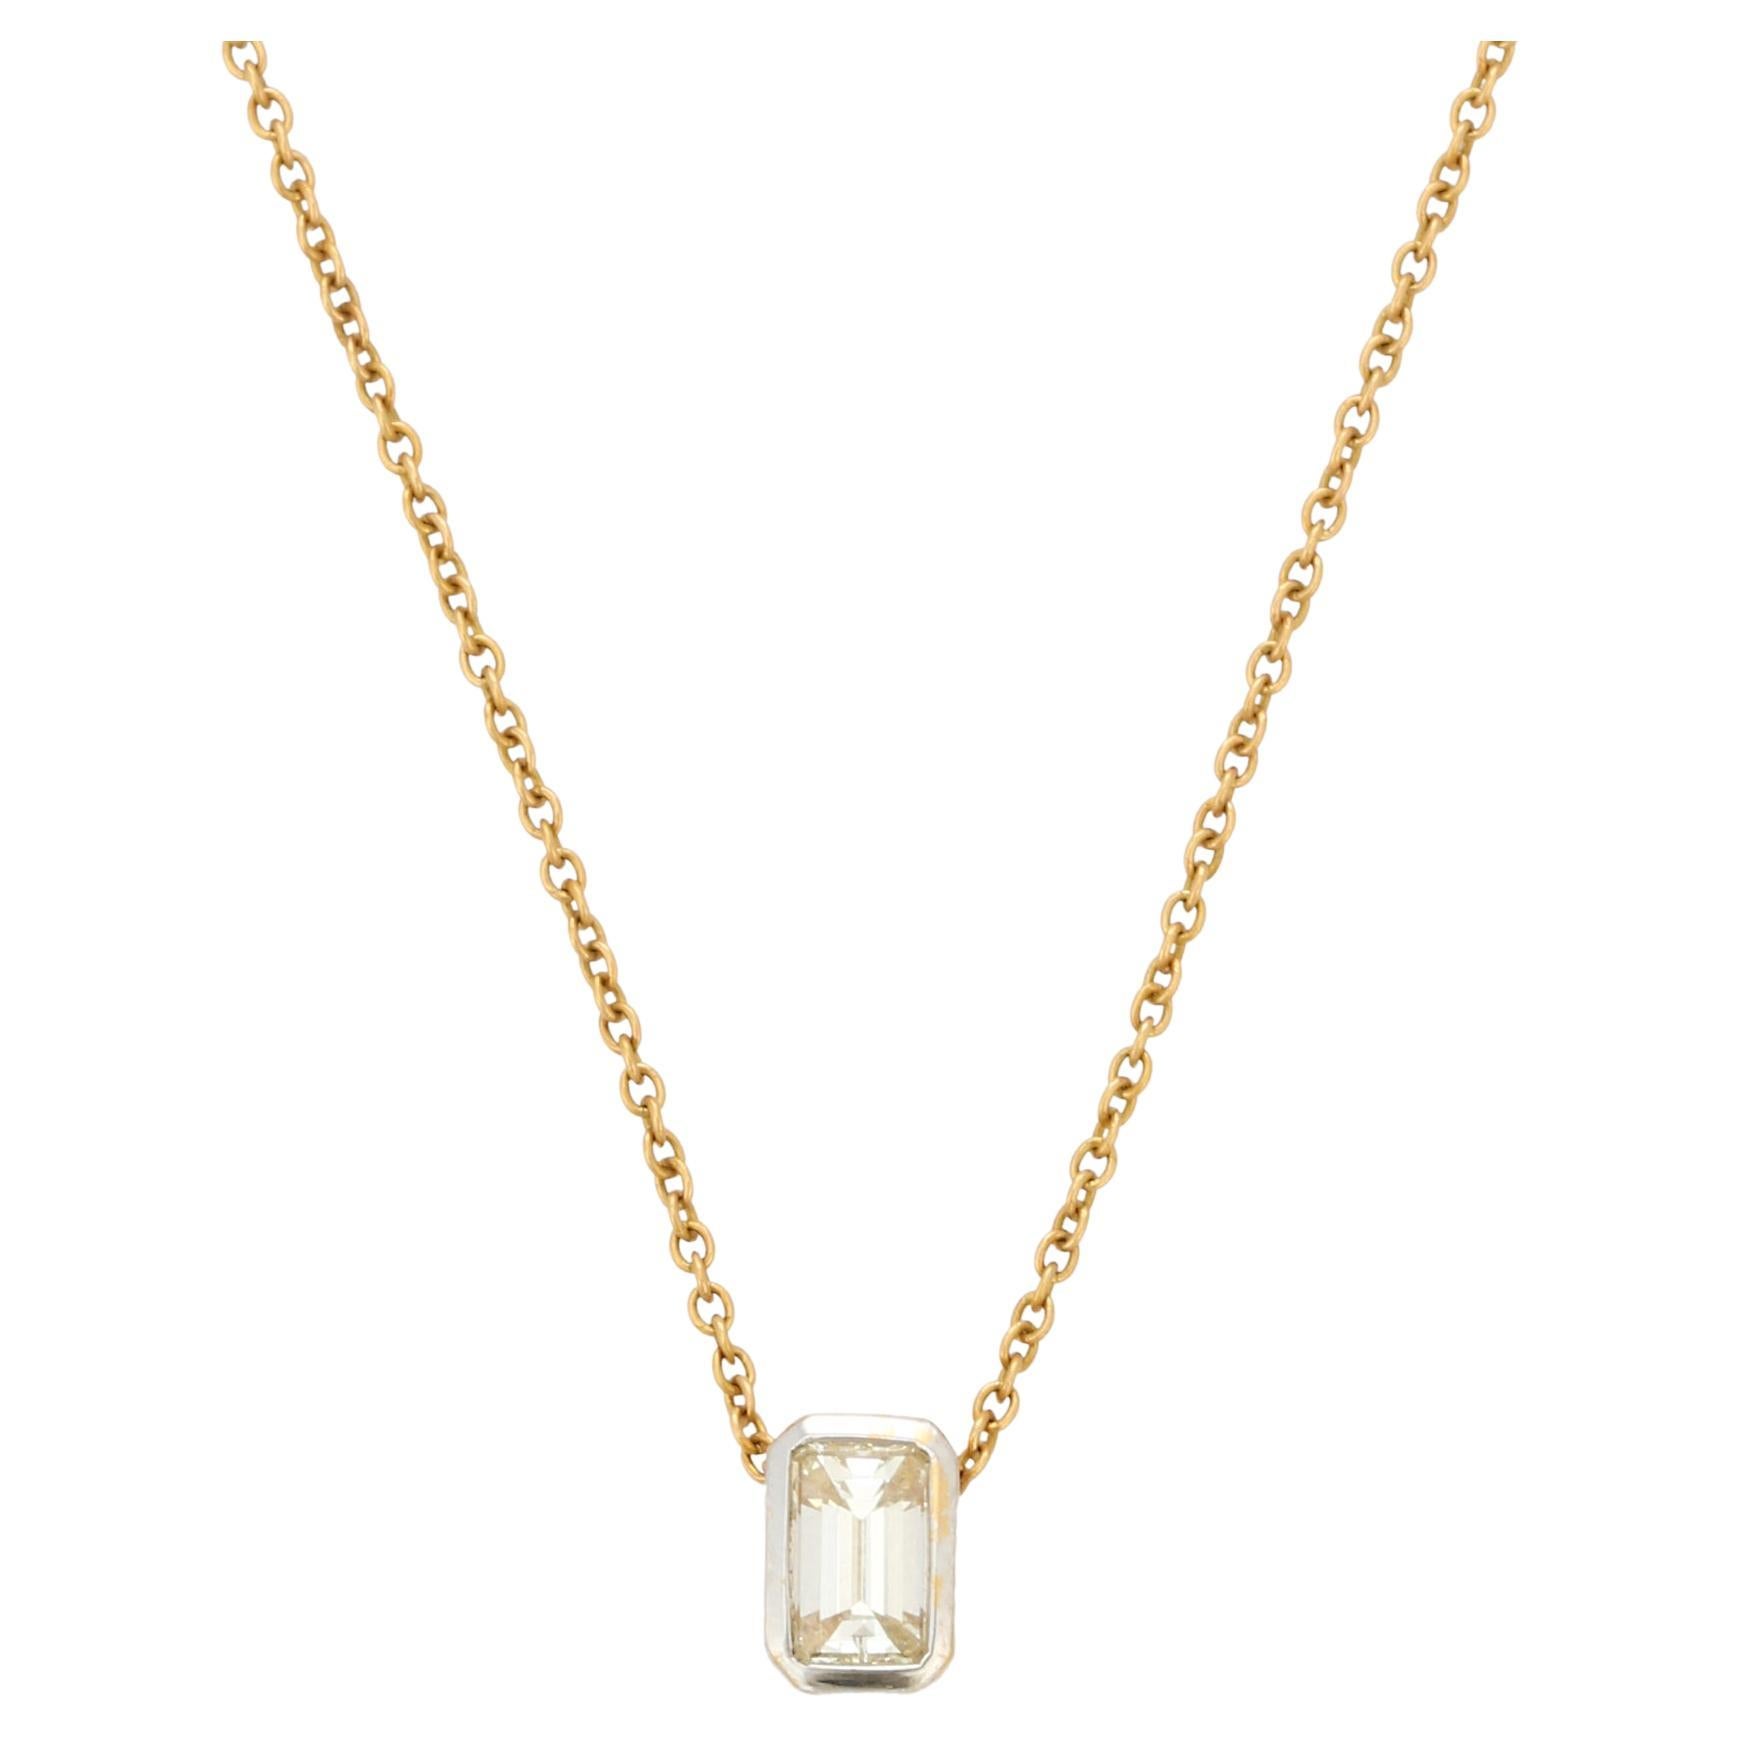 Octagon Cut Diamond Pendant Chain Necklace in 18K Yellow Gold 